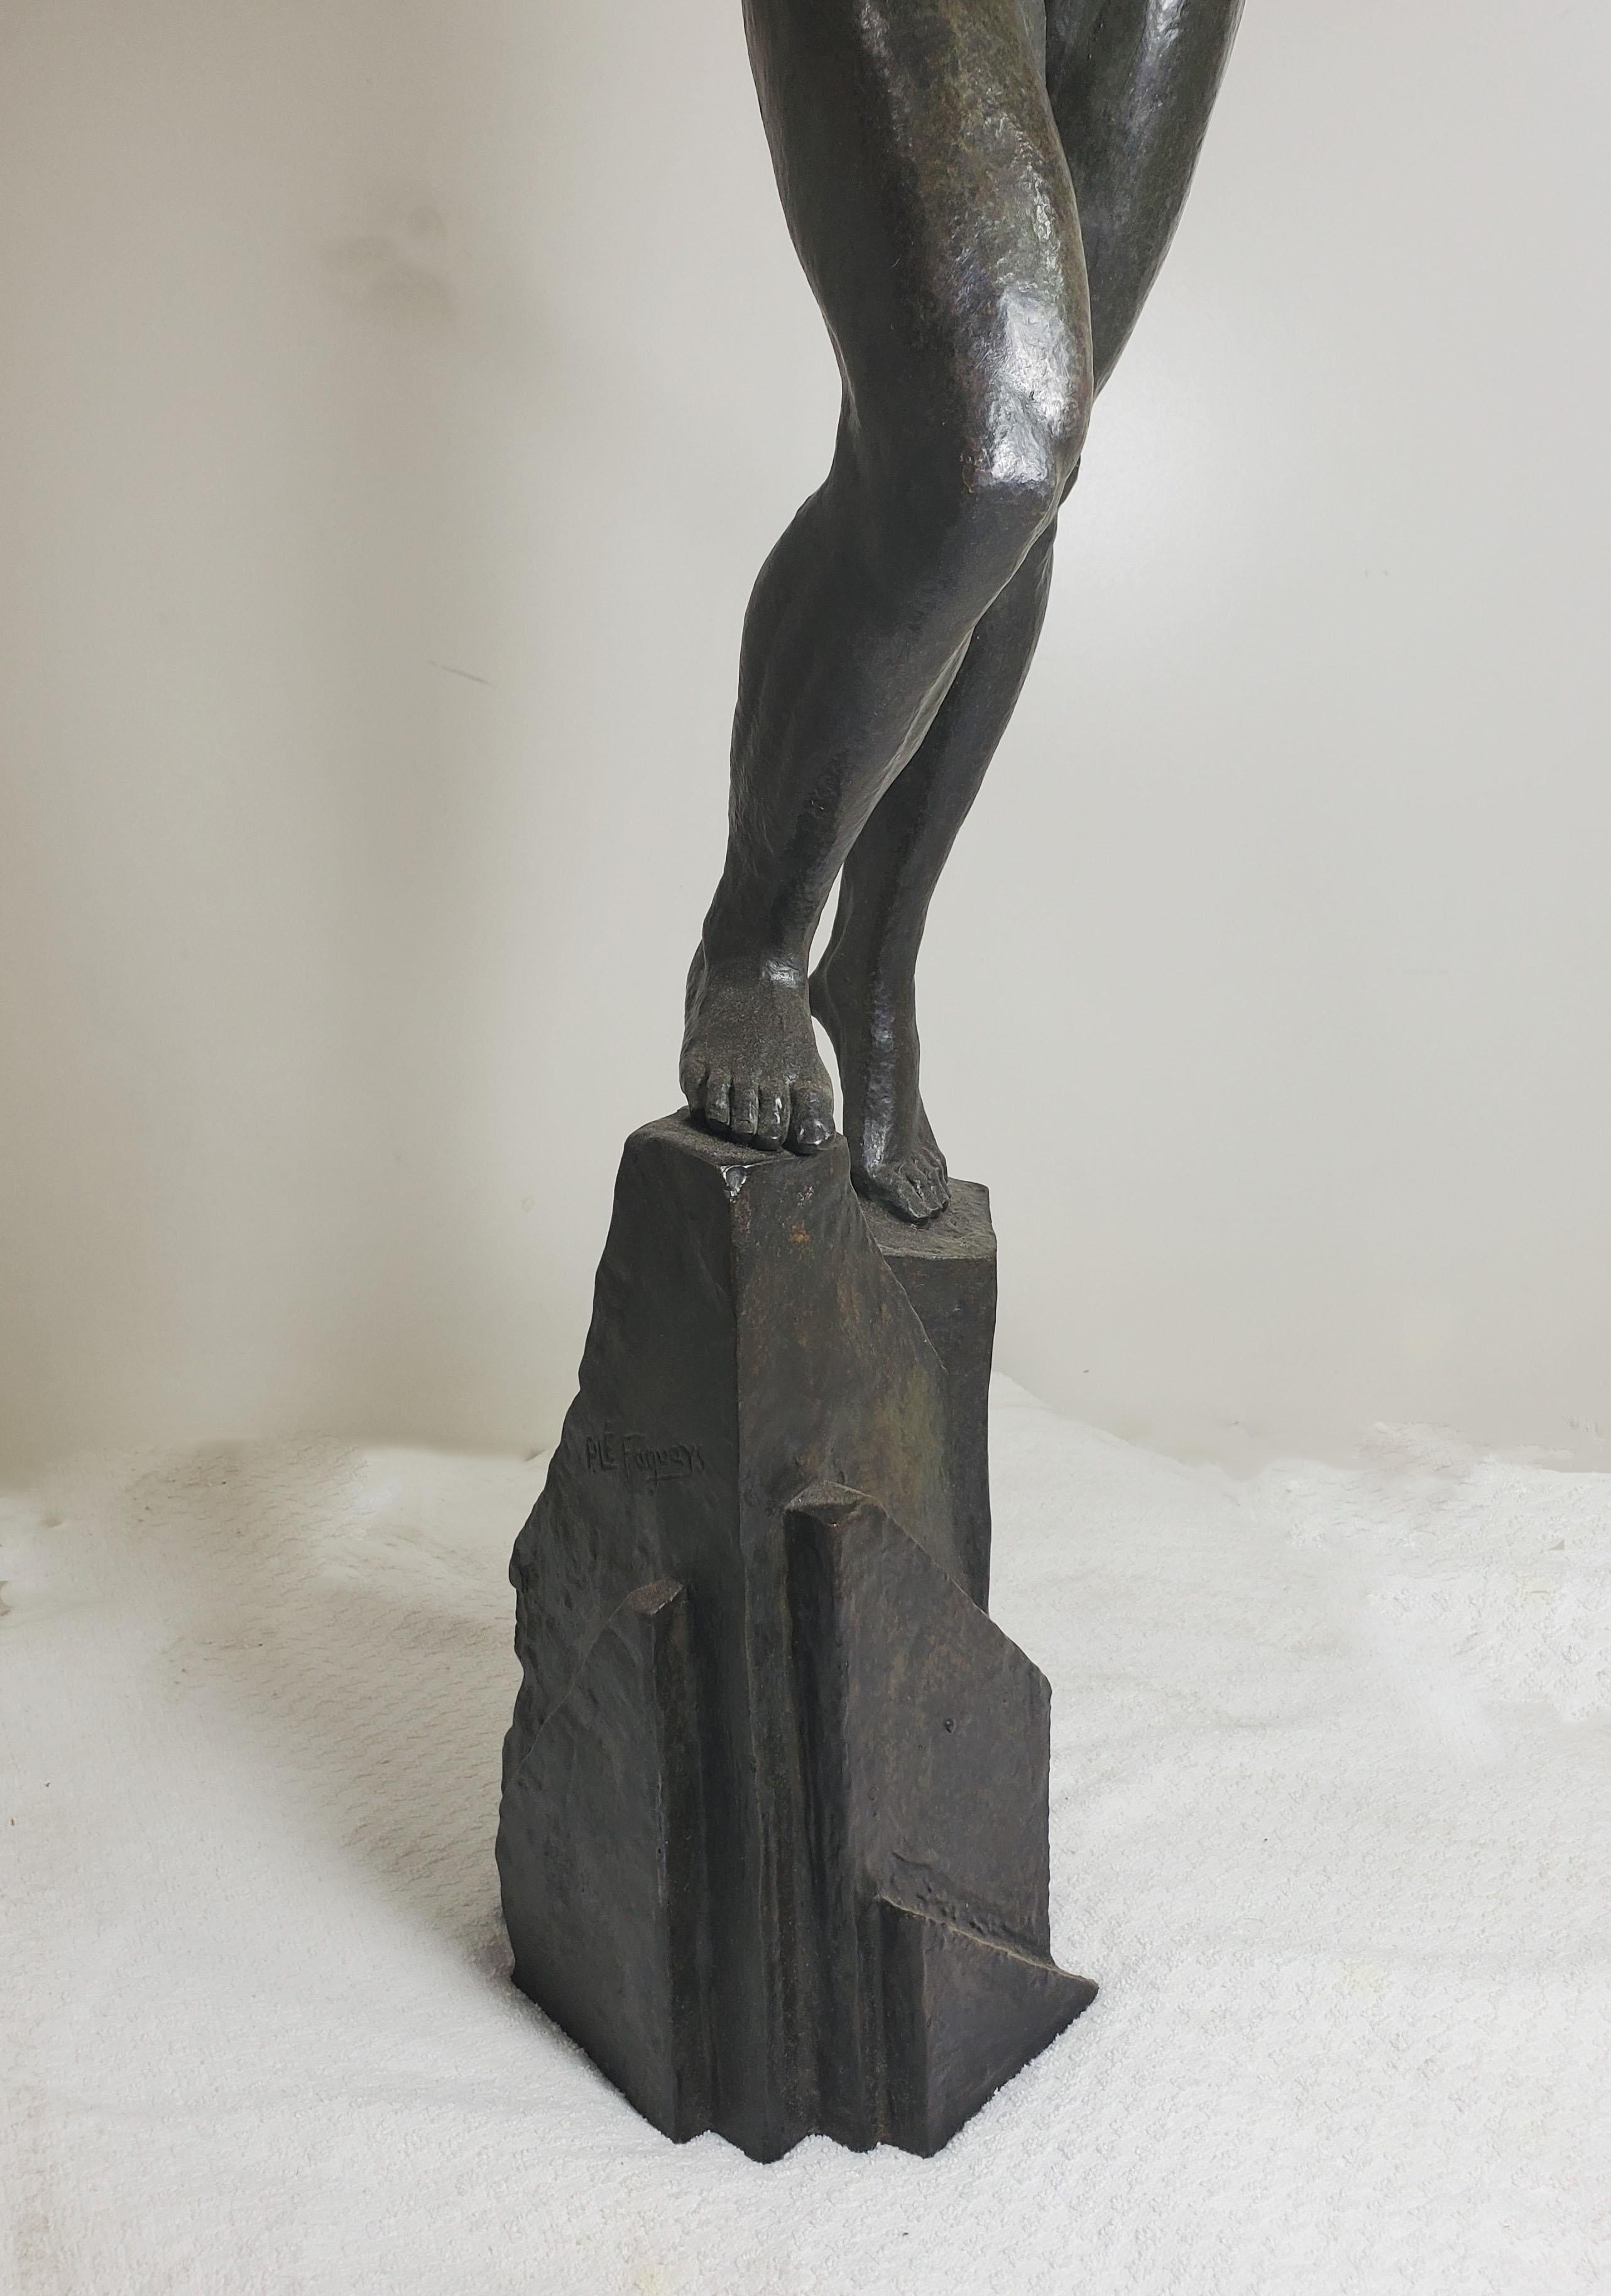 Large Original French Art Deco Bronze of a Semi-Nude Male Athlete by Le Faguays For Sale 12